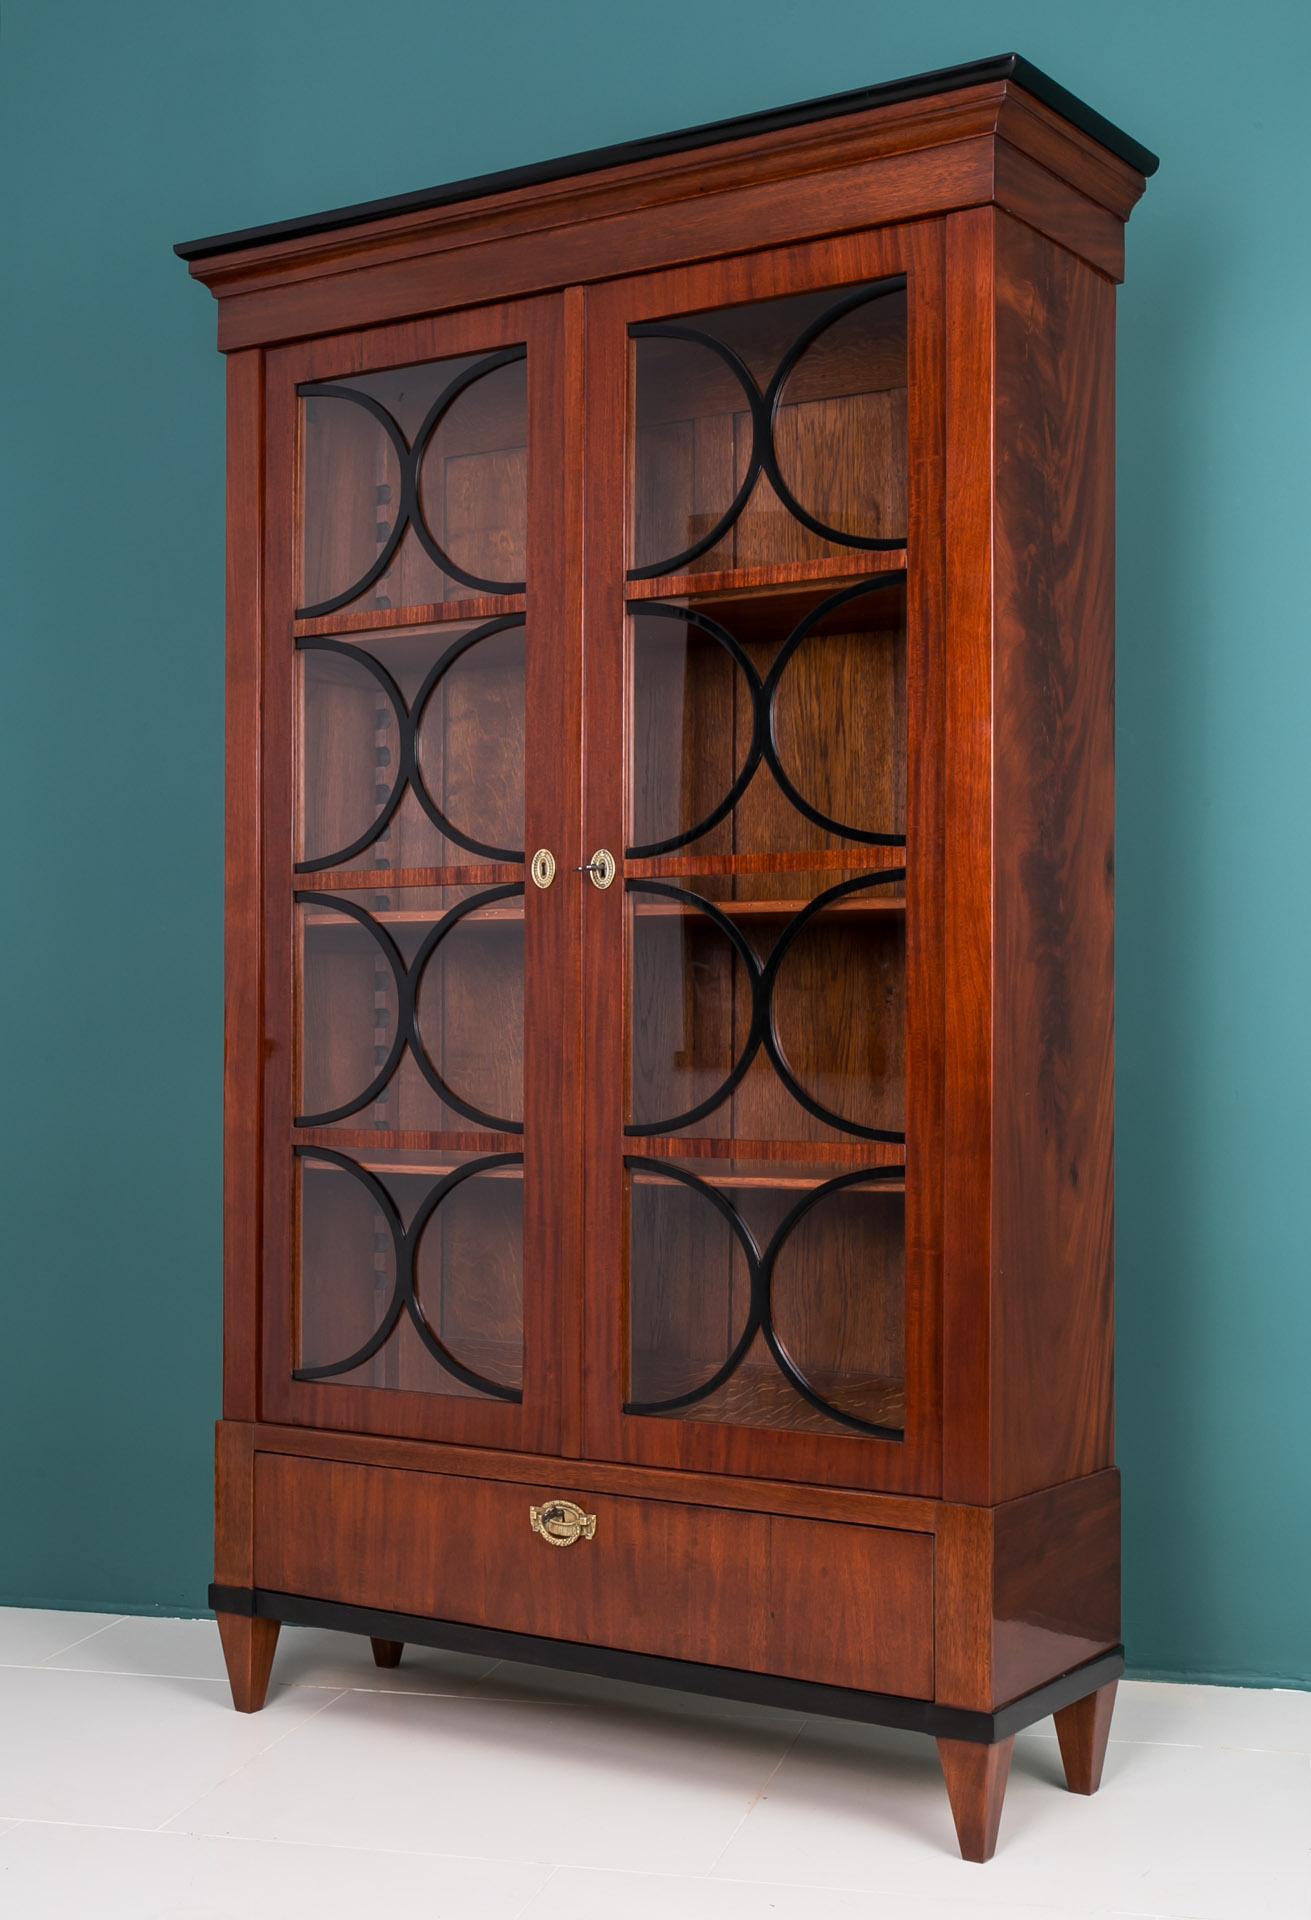 This Biedermeier vitrine comes from Austria and was made in 19th century. The piece is made of oak wood veneered with mahogany. The doors have got unique muntins emphasizing its style and elegance. It features 3 shelves with adjustable height system